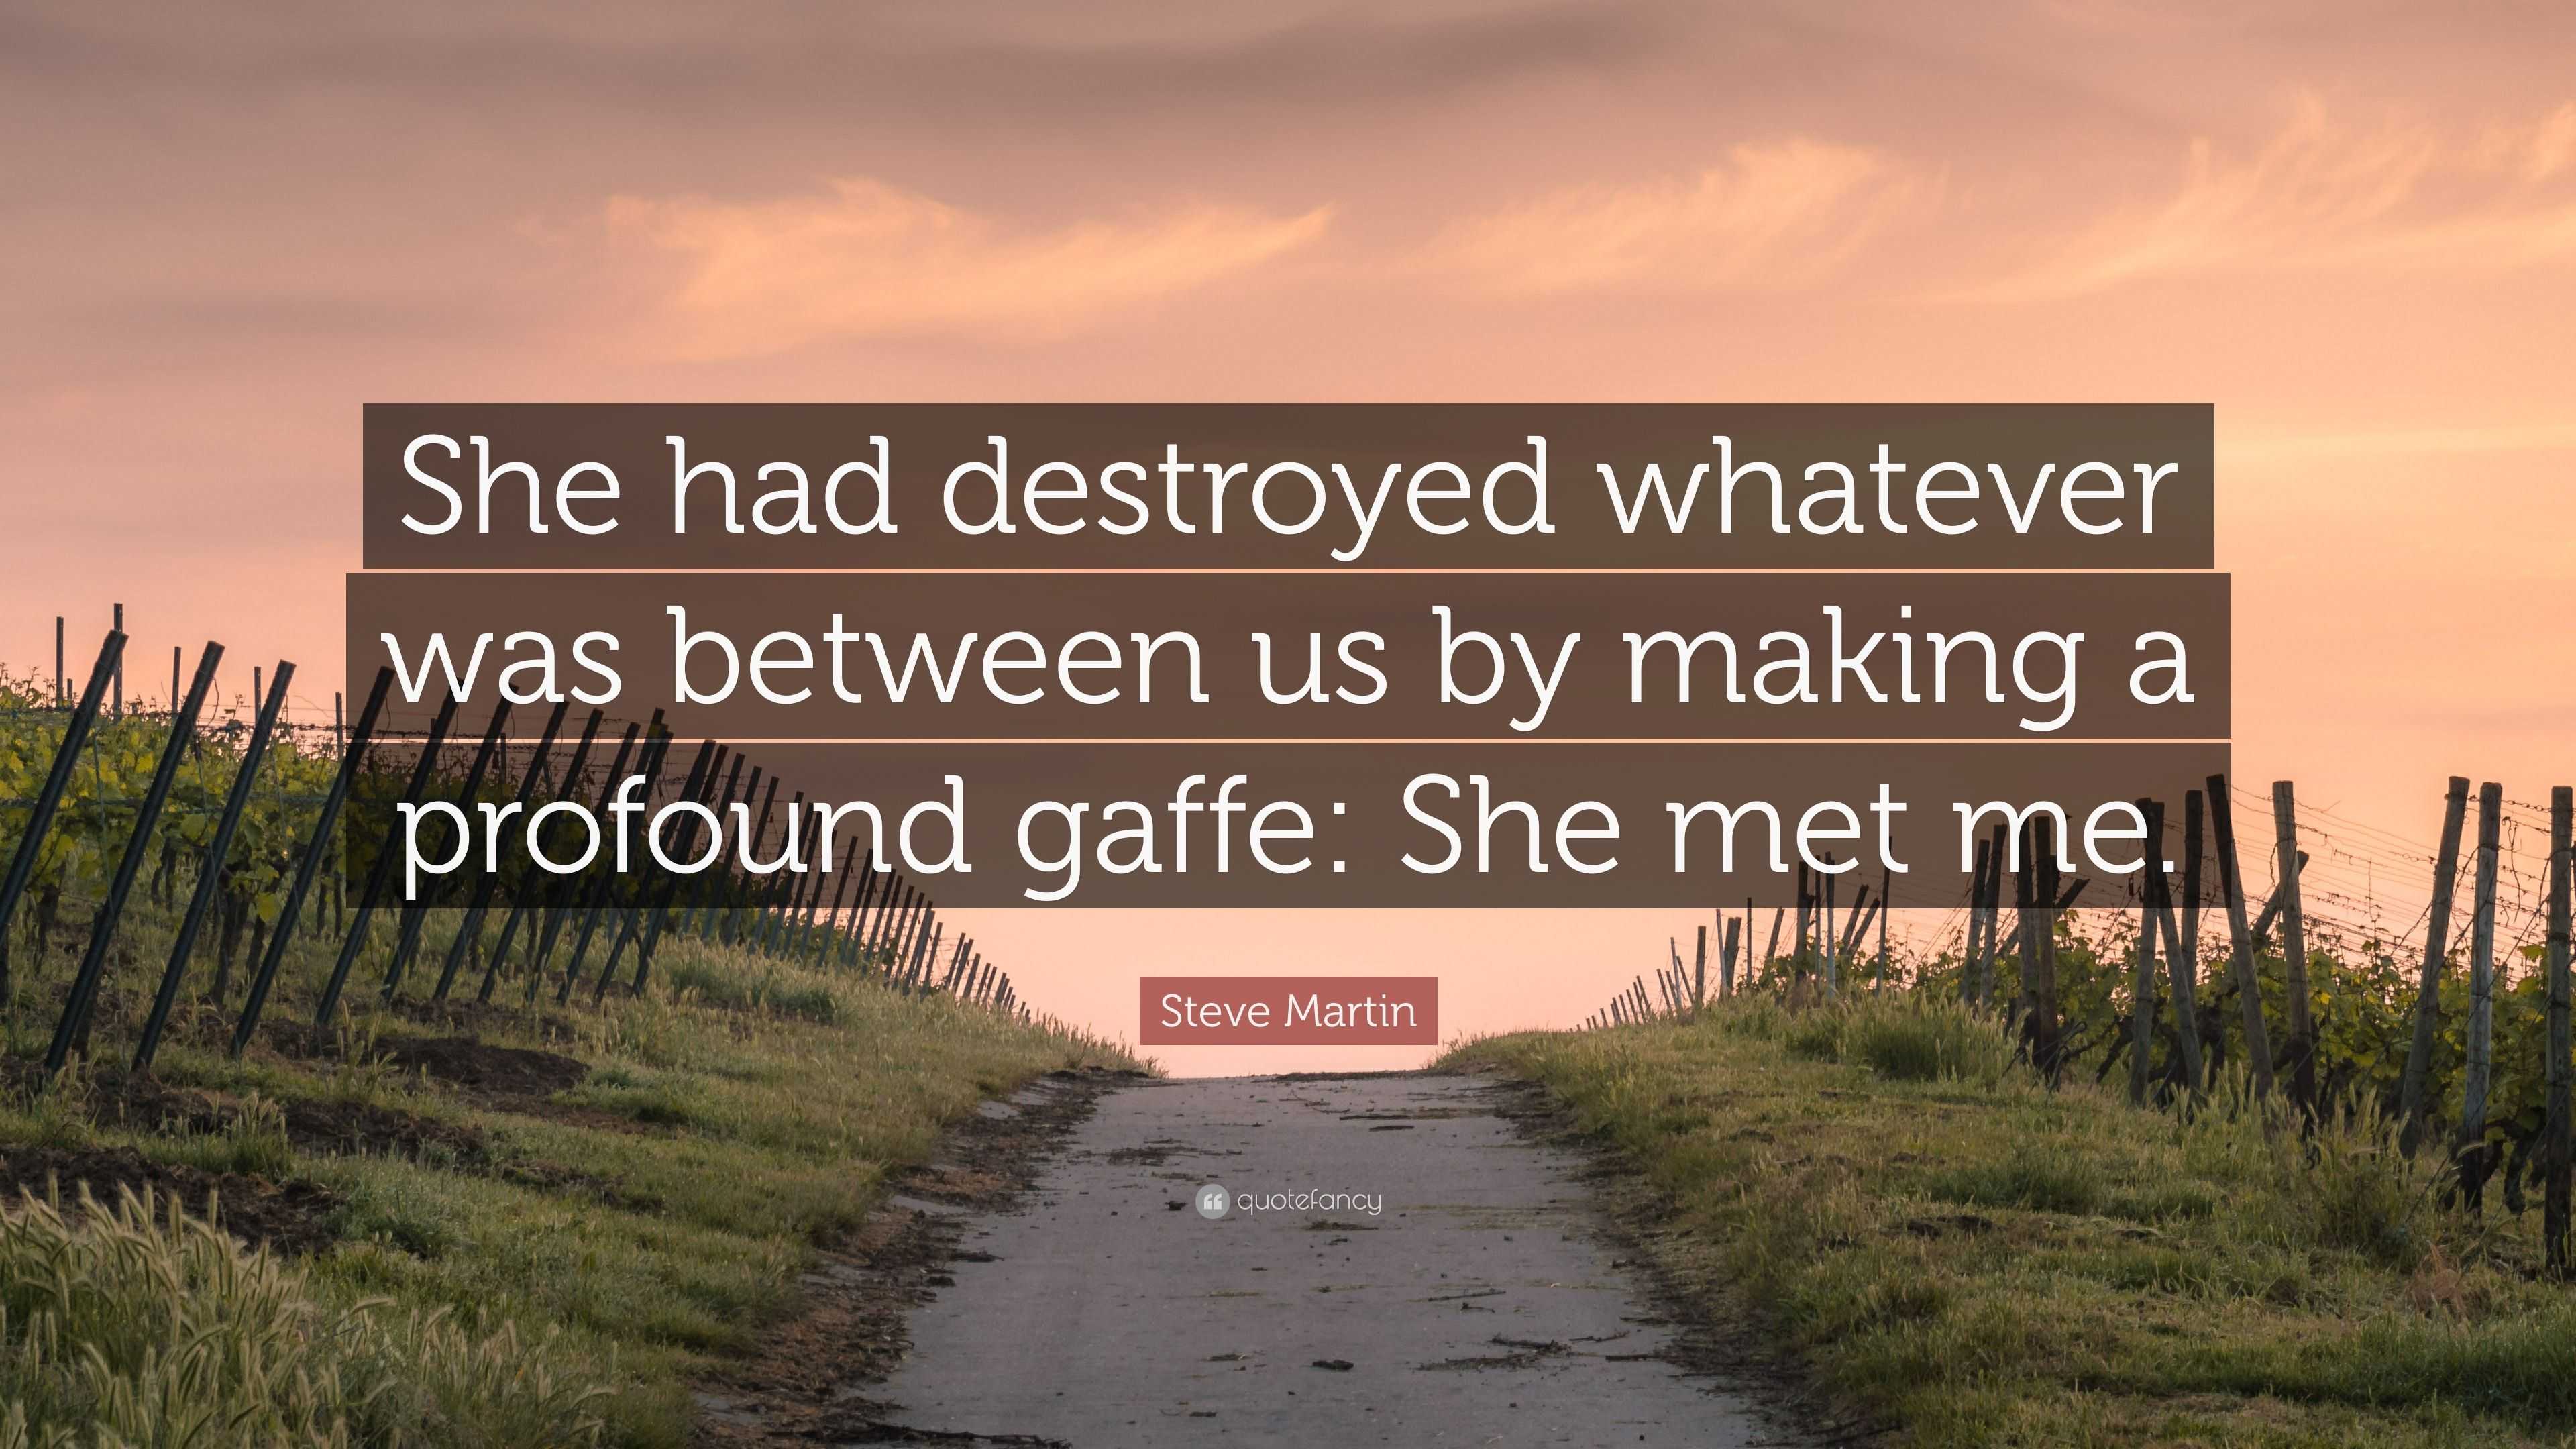 Steve Martin Quote: “She had destroyed whatever was between us by ...